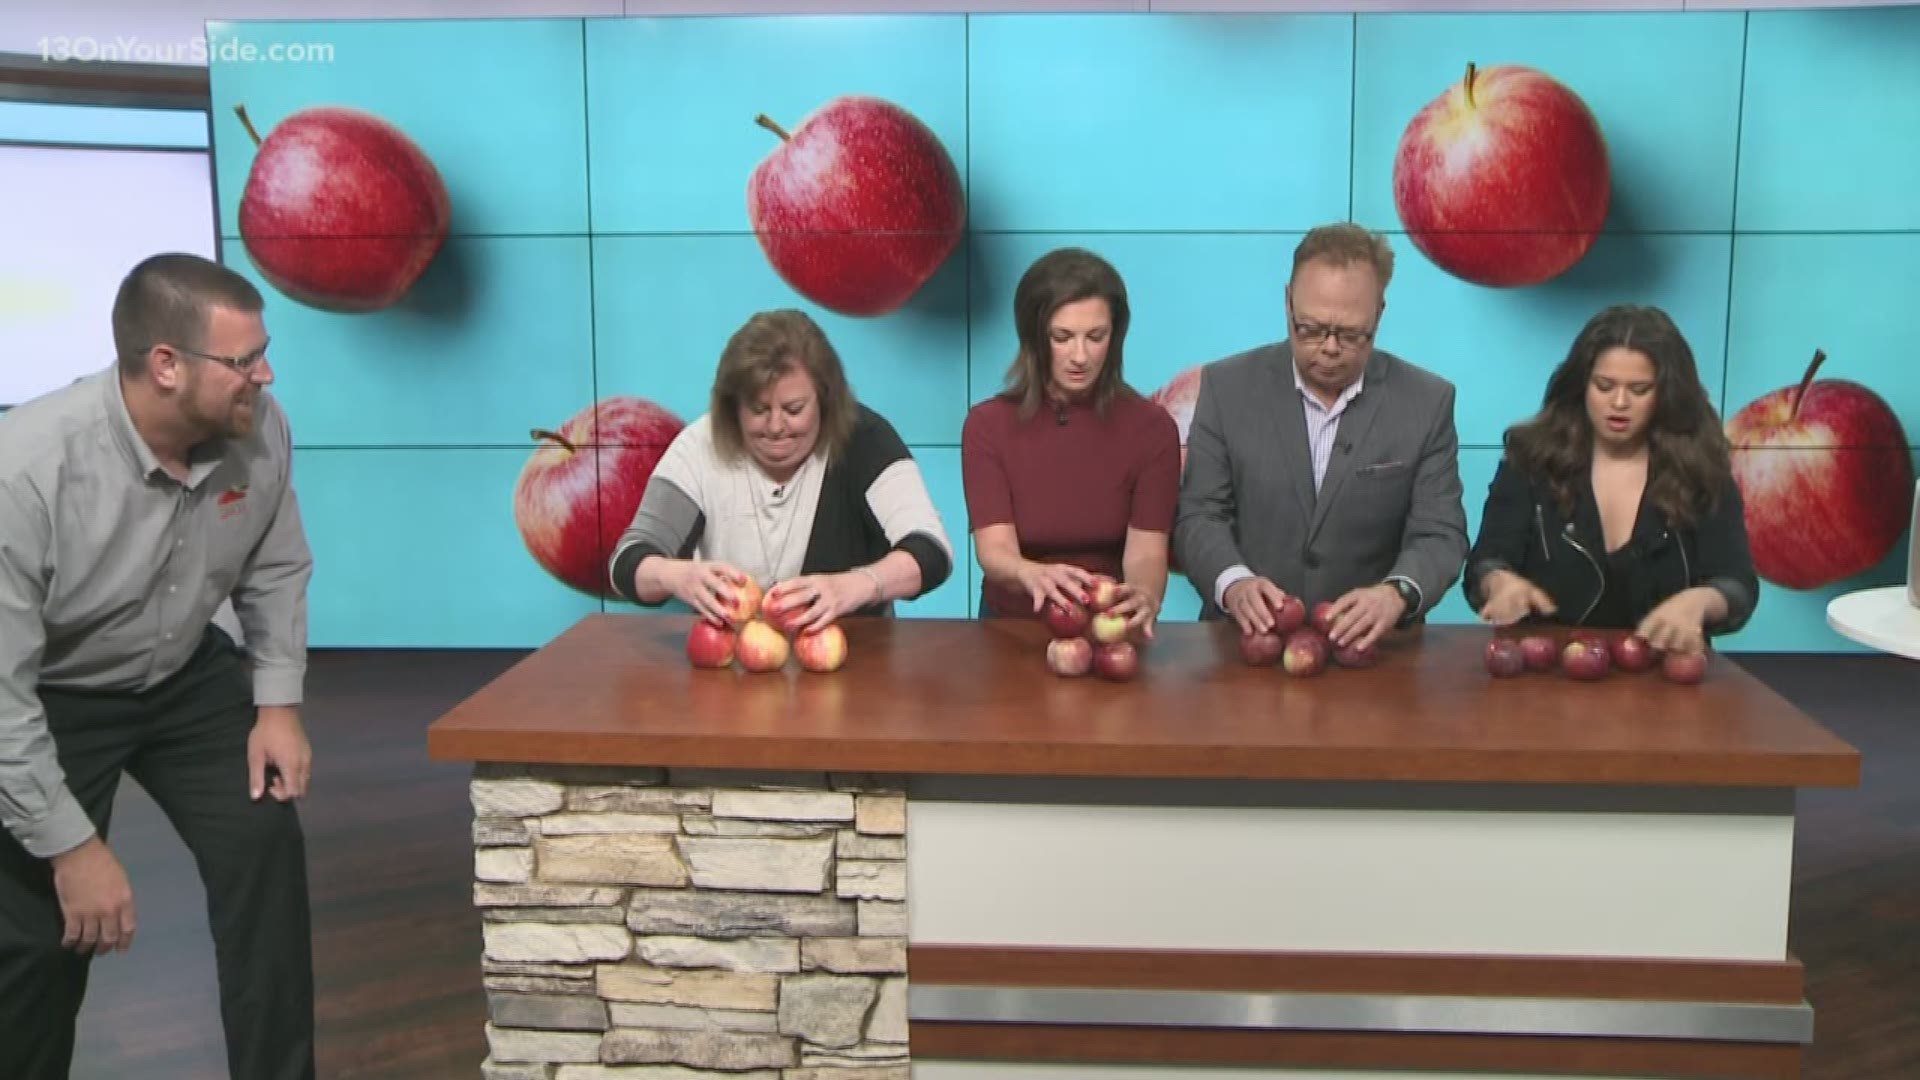 The My West Michigan crew was feeling festive for the first day of fall and took on the Apple Stacking Challenge -- see how they did!